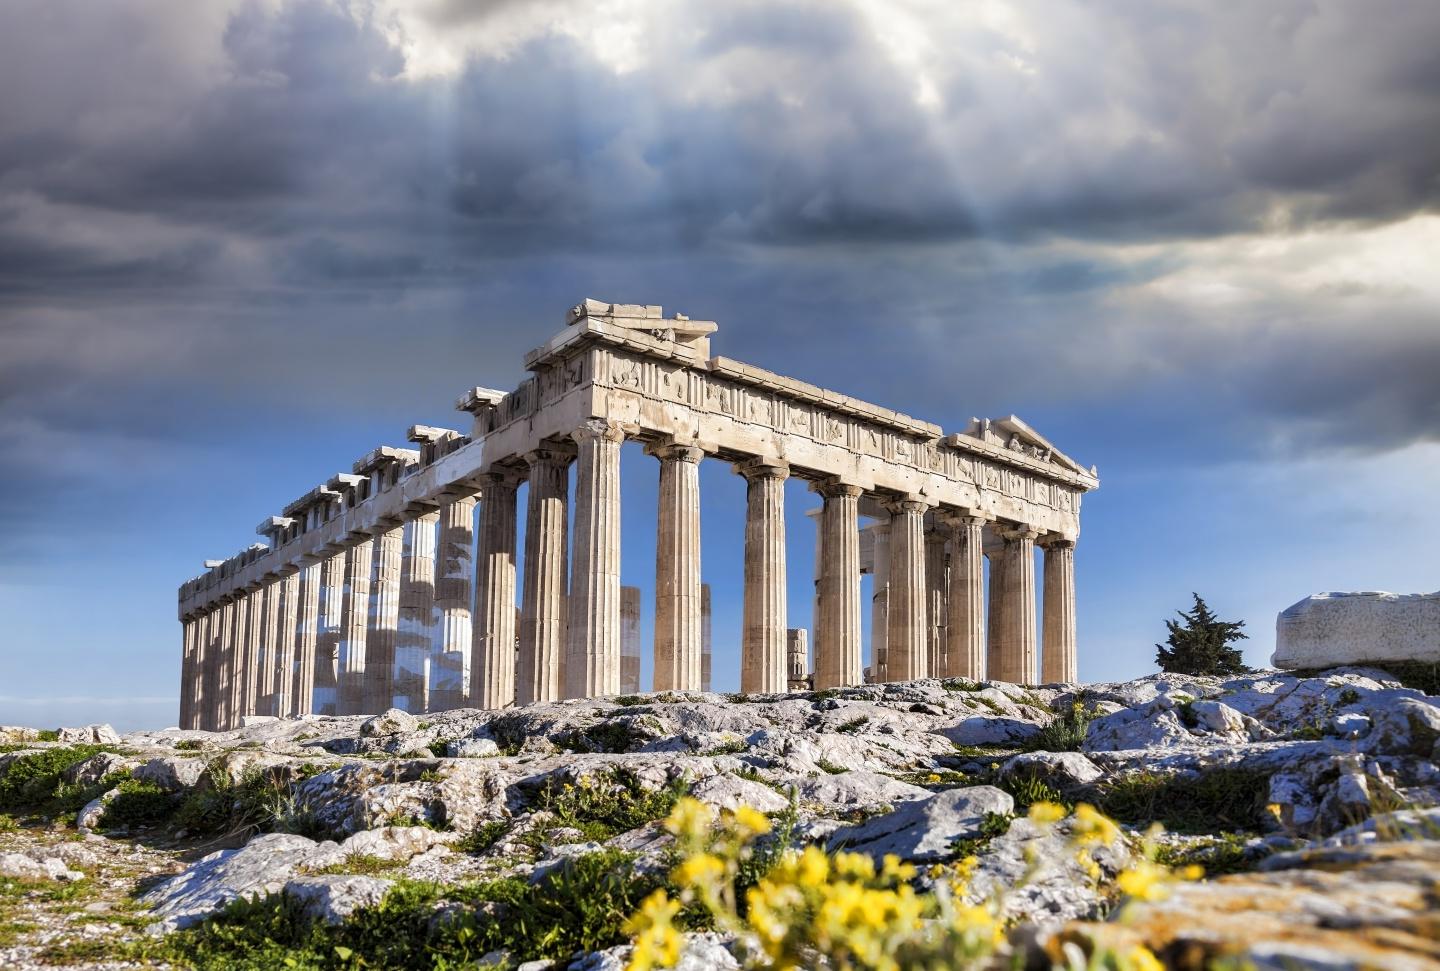 Sunlight peaks through storm clouds over the Acropolis in Athens, Greece